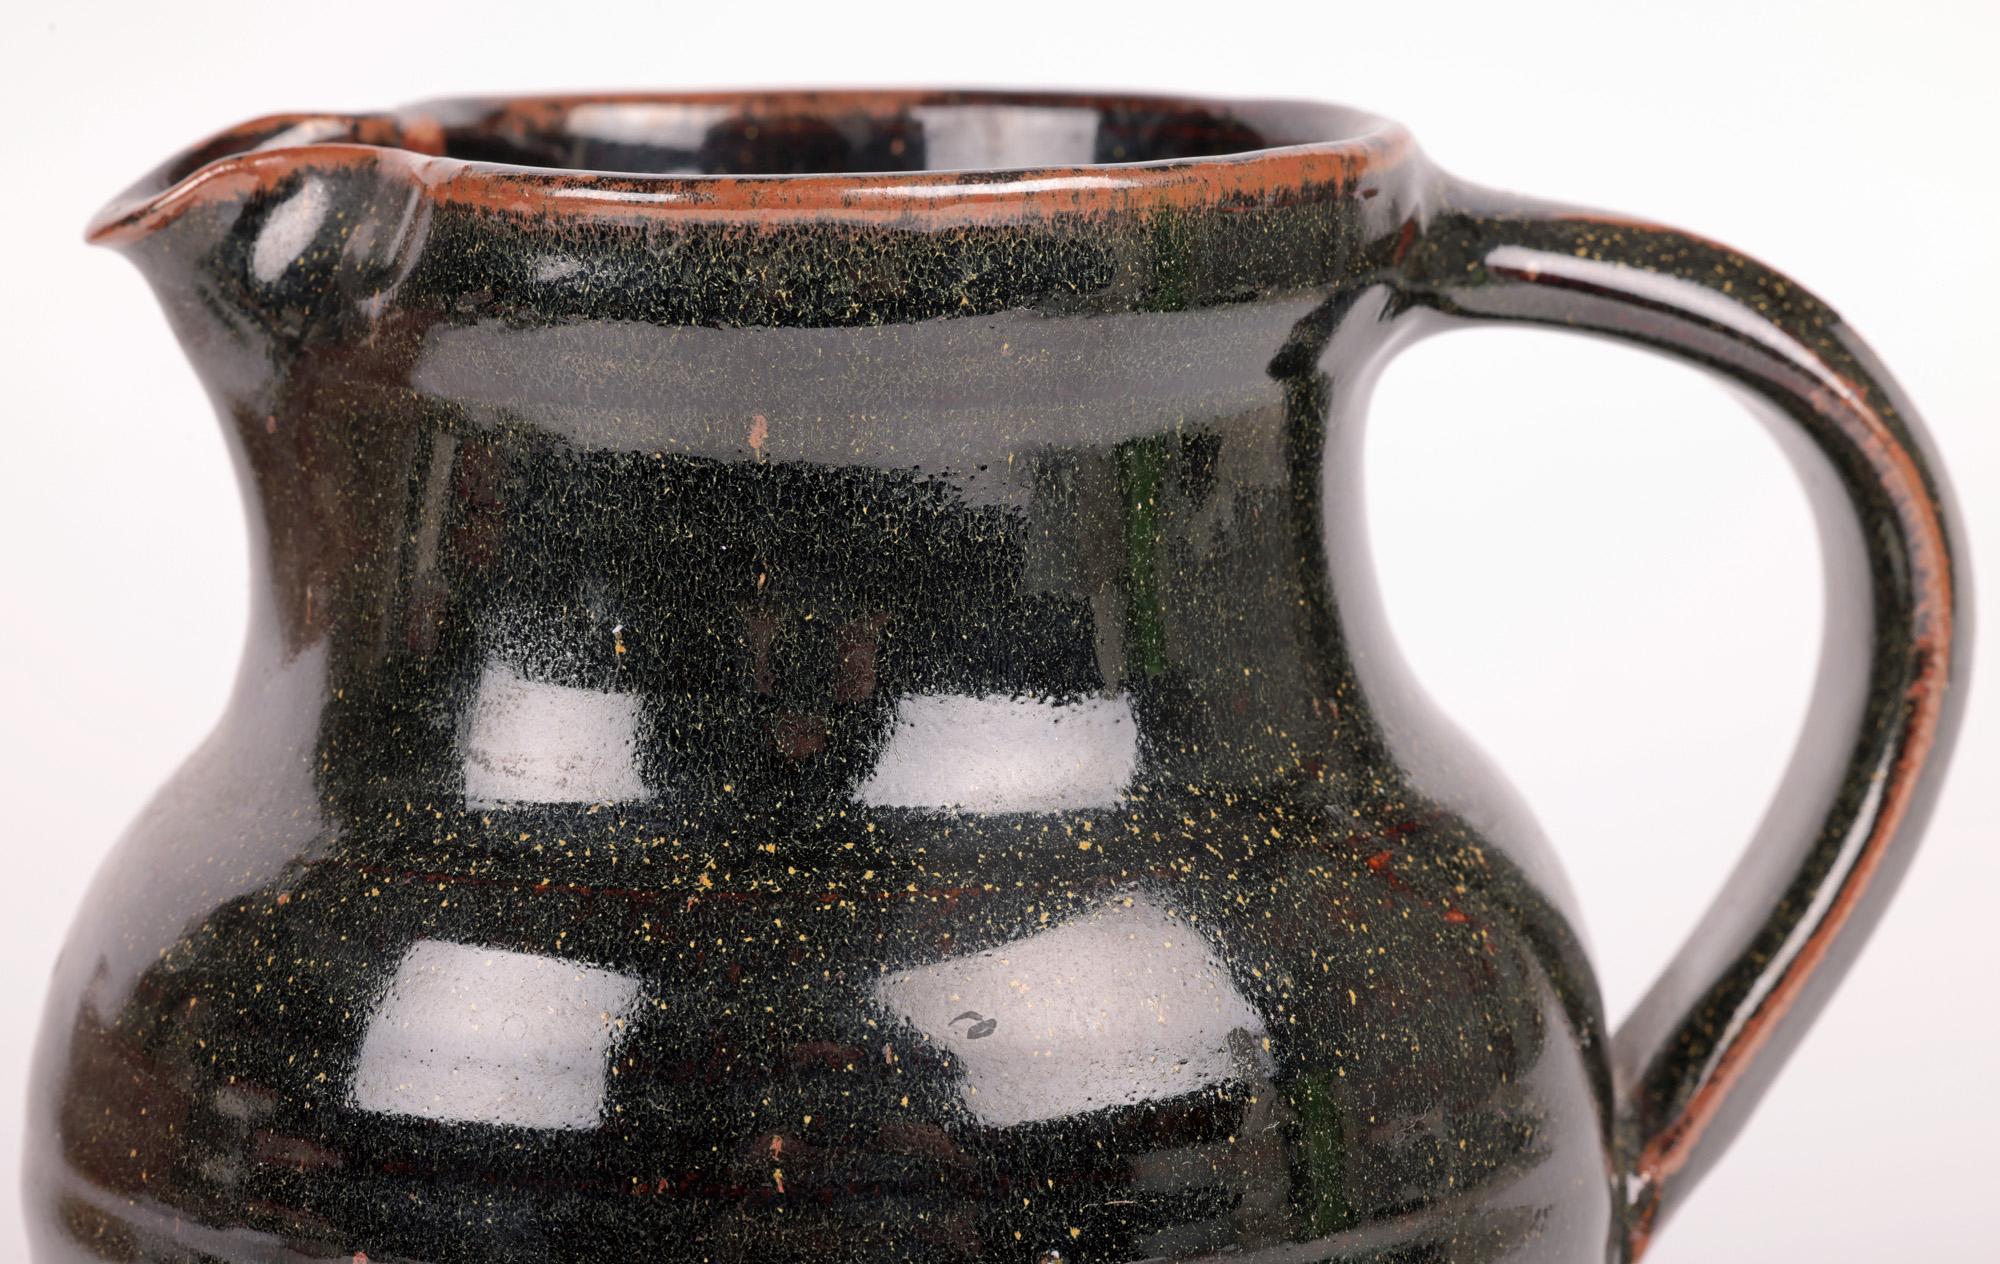 A fine tenmoku glazed studio pottery jug probably by Ray Finch and made at the acclaimed Winchcombe Pottery in Gloucestershire, England in the latter 20th century. The hand thrown jug is of round bulbous shape standing on a flat narrow round